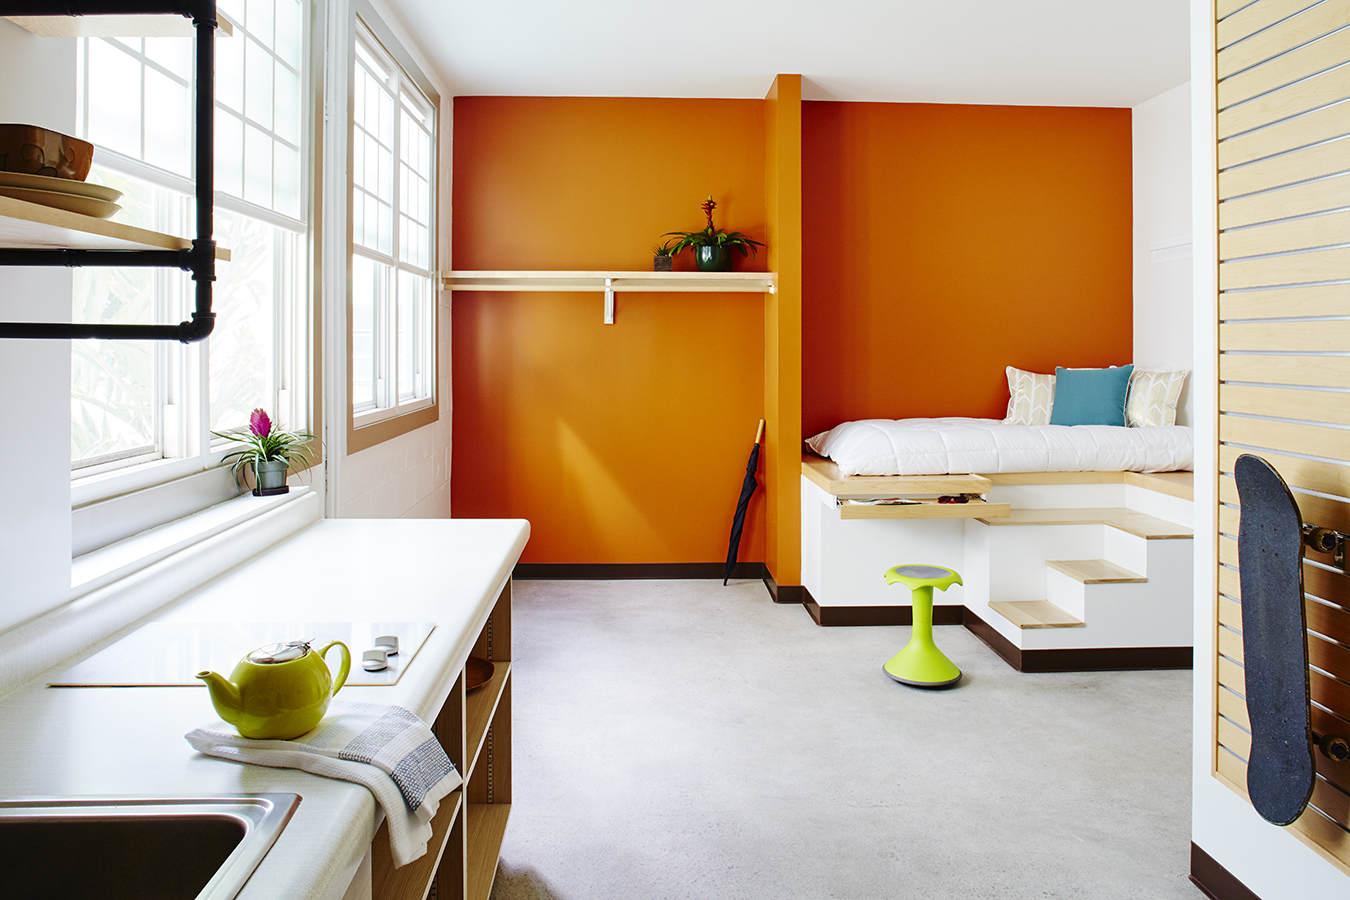 Photograph of the interior of an apartment, showing a small kitchenette, a bright orange wall, and a built-in platform bed. 